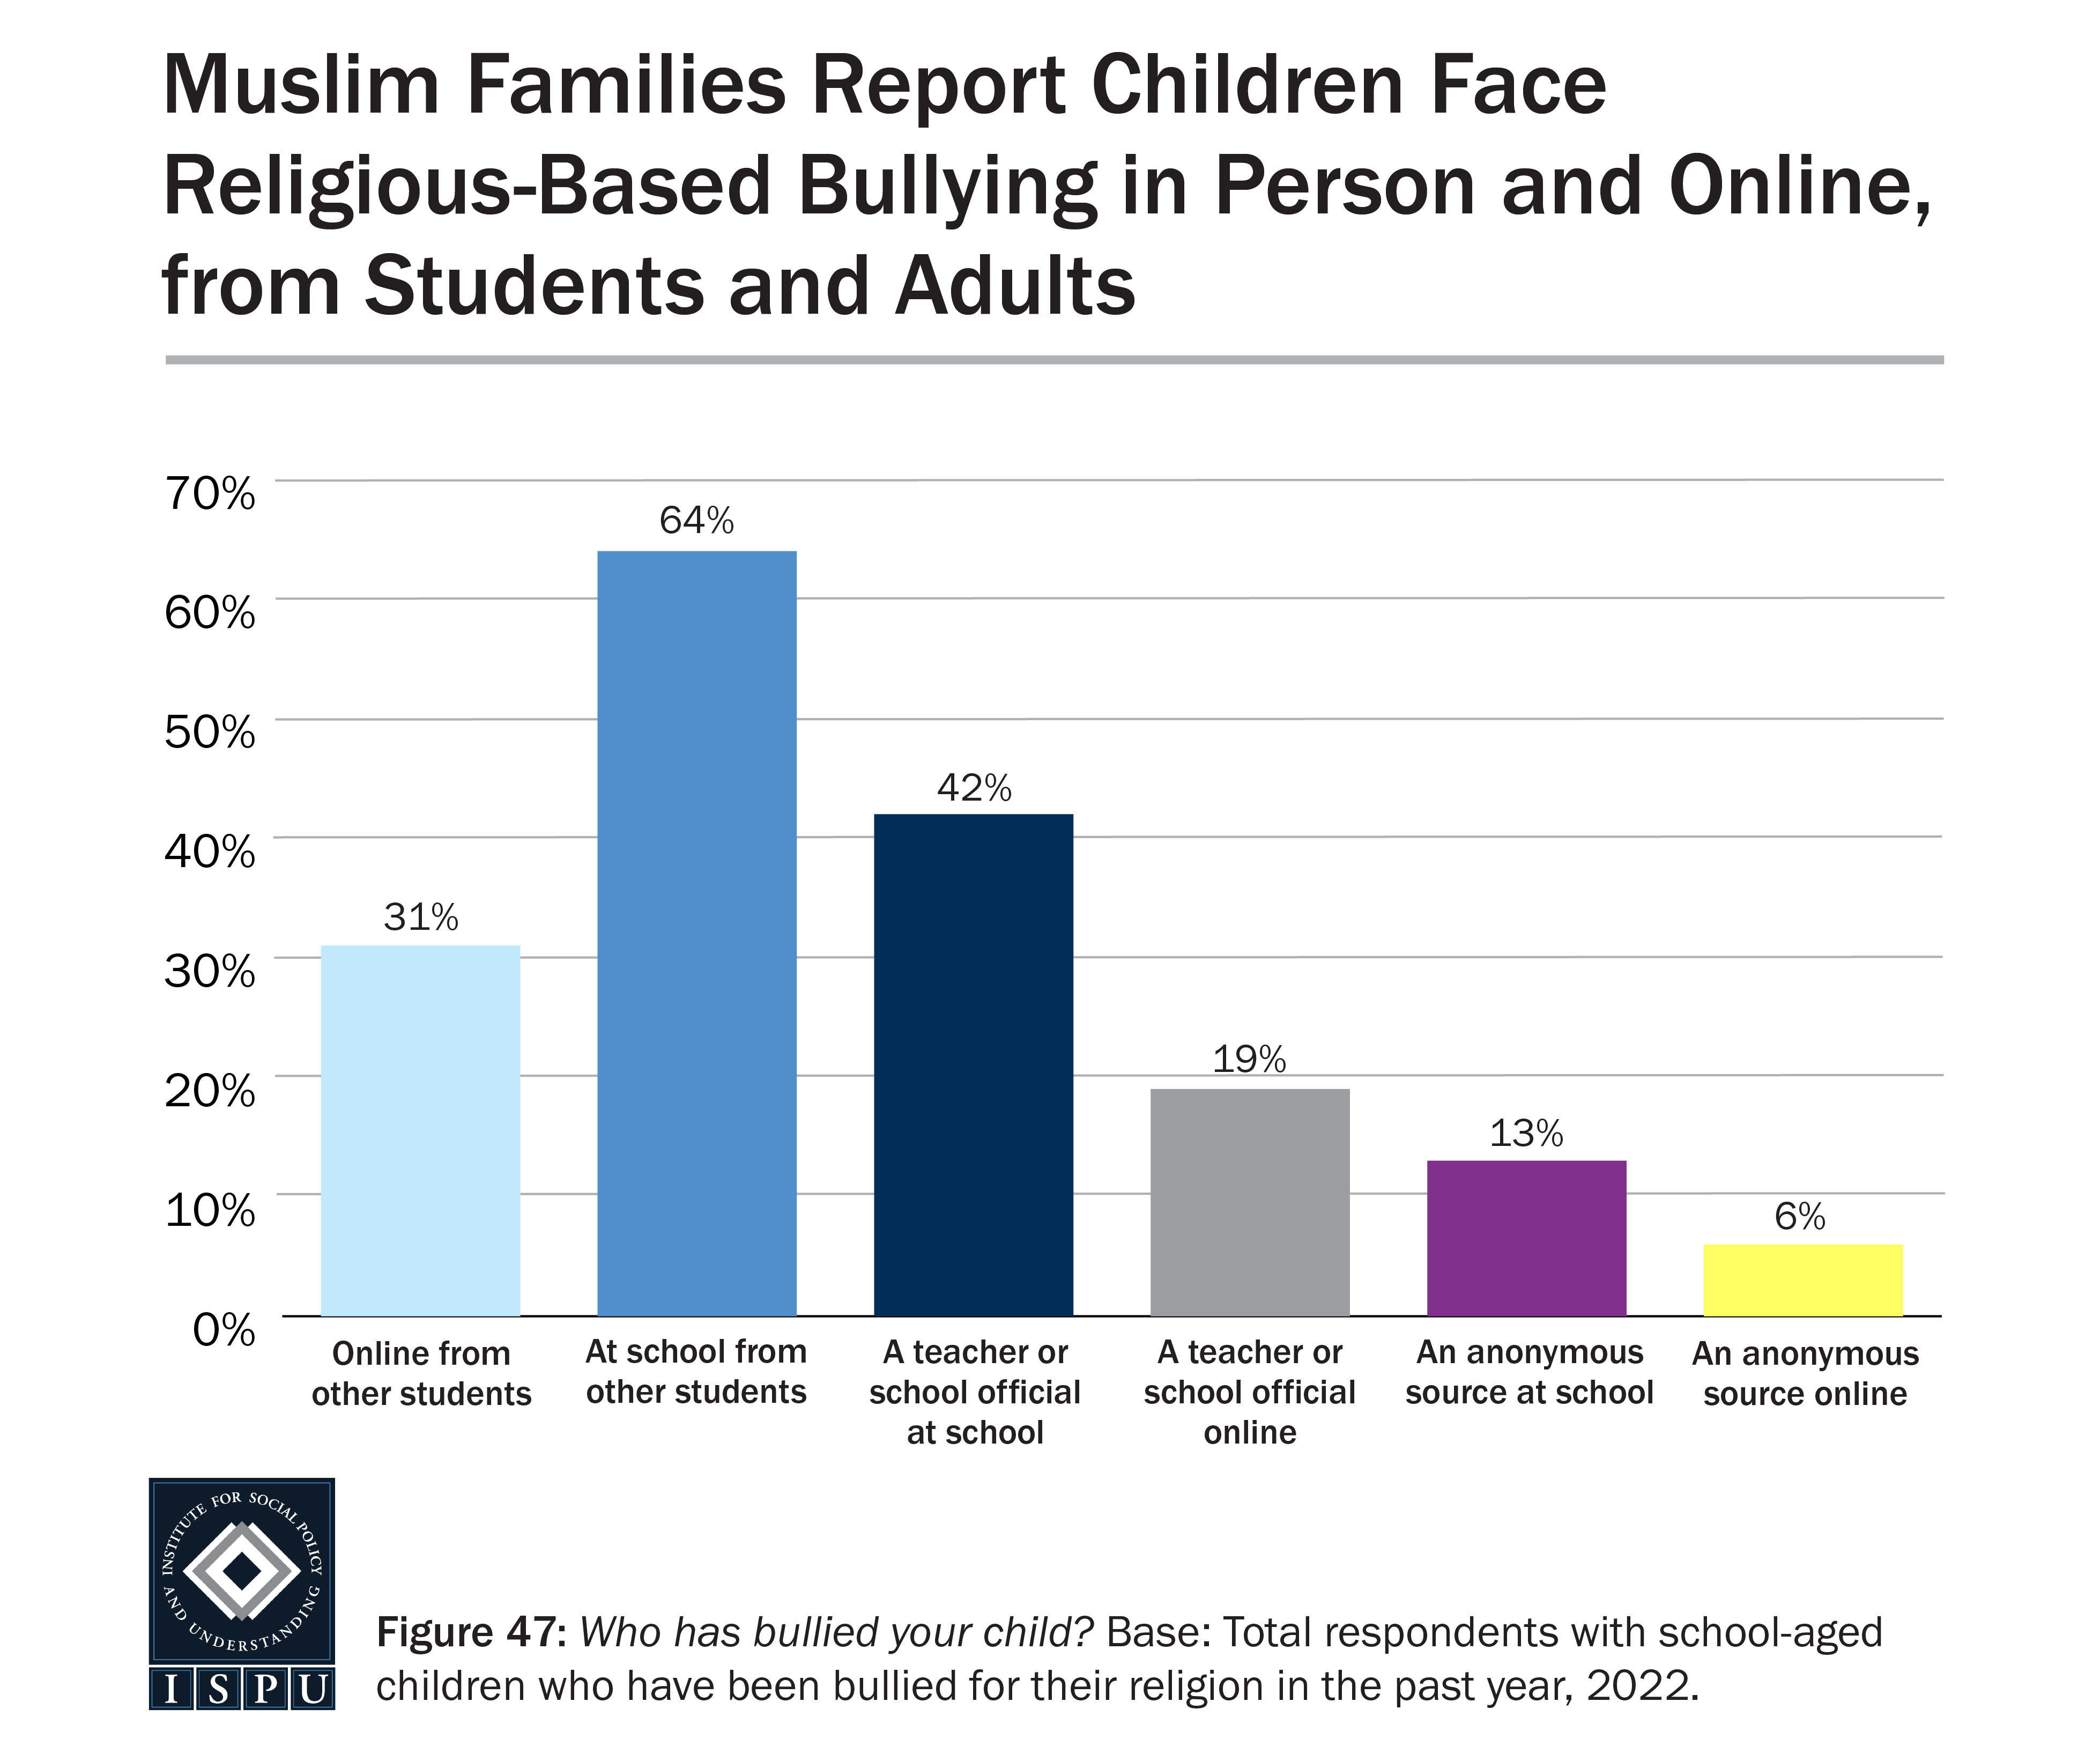 A bar graph showing the sources of religious-based bullying faced by children in Muslim families.